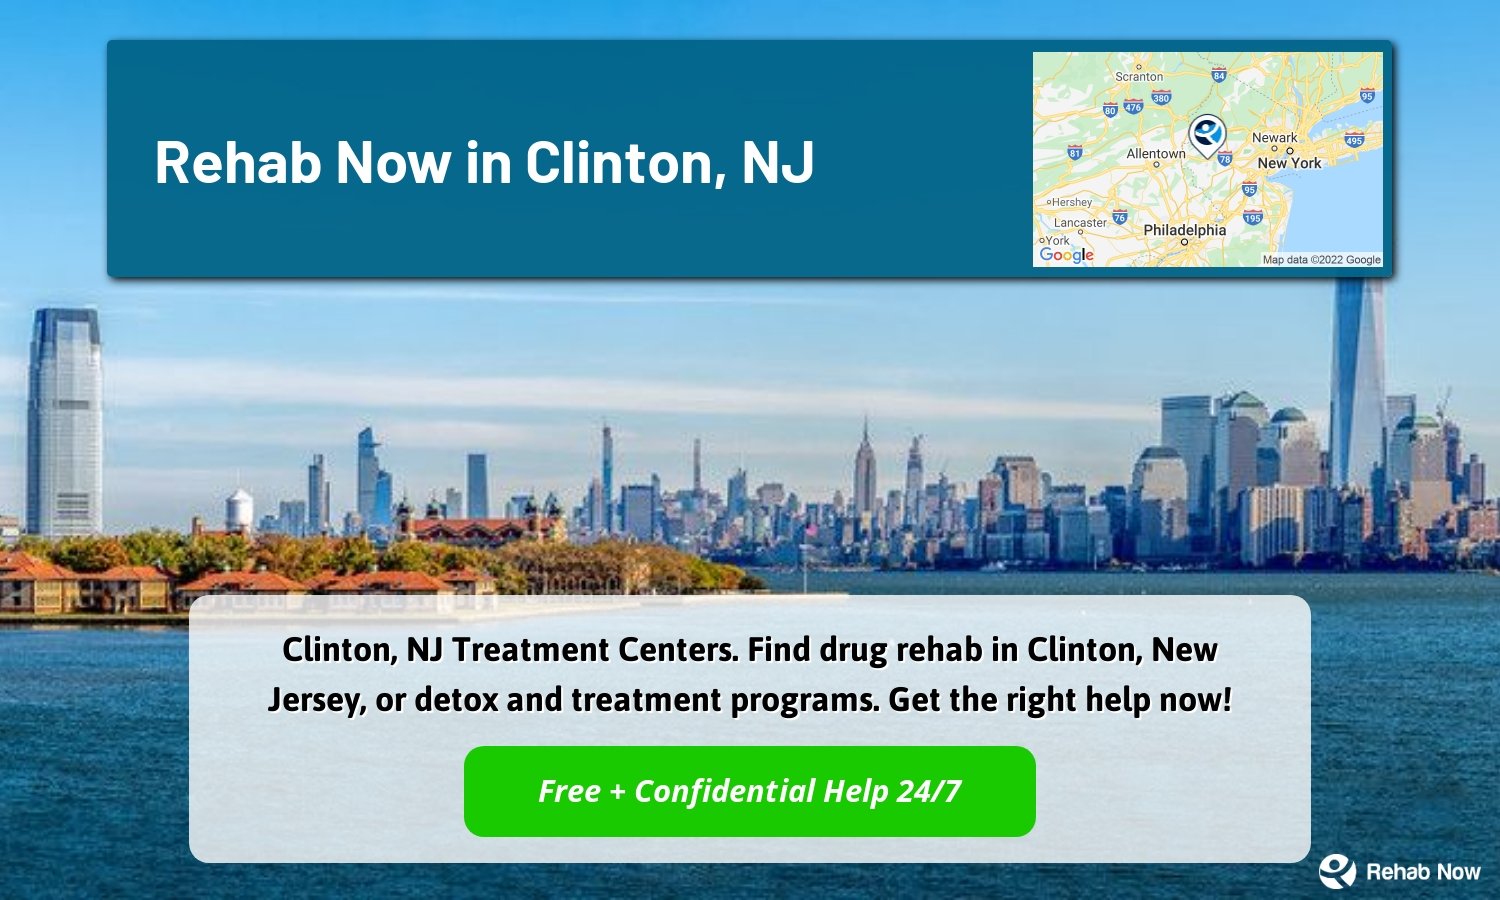 Clinton, NJ Treatment Centers. Find drug rehab in Clinton, New Jersey, or detox and treatment programs. Get the right help now!